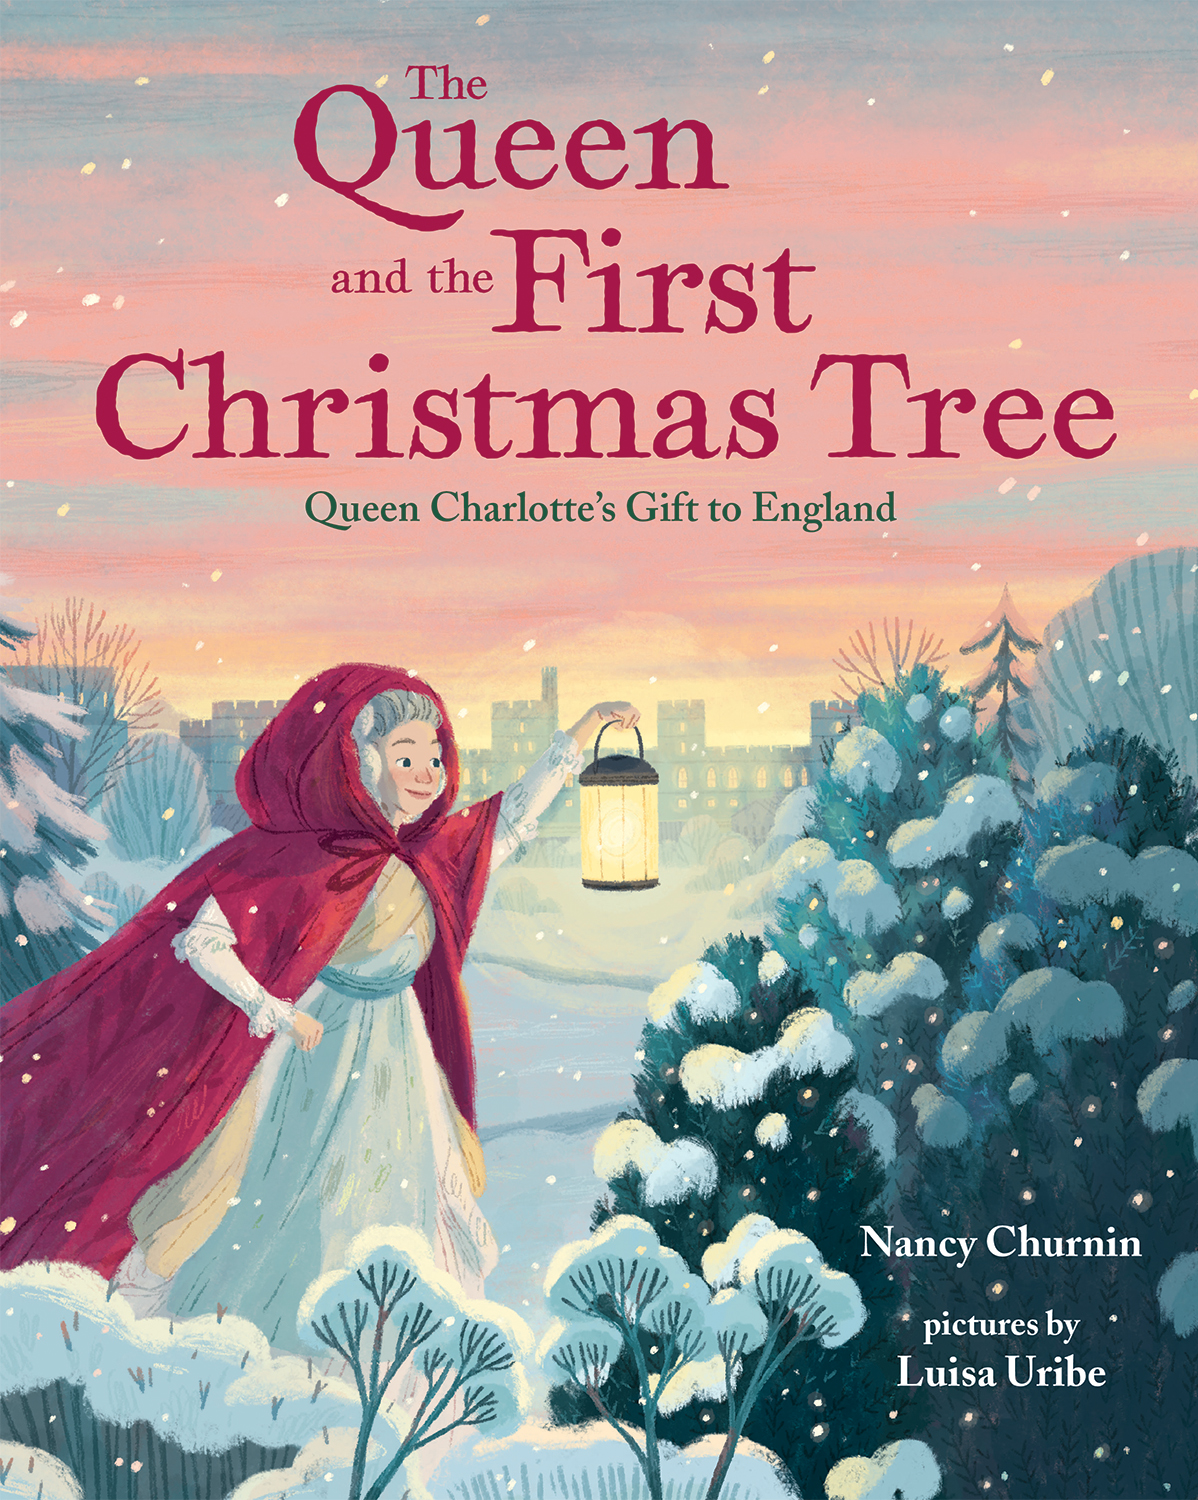 Queen Charlotte wearing a red hooded cape holding a lantern and walking in the snow.